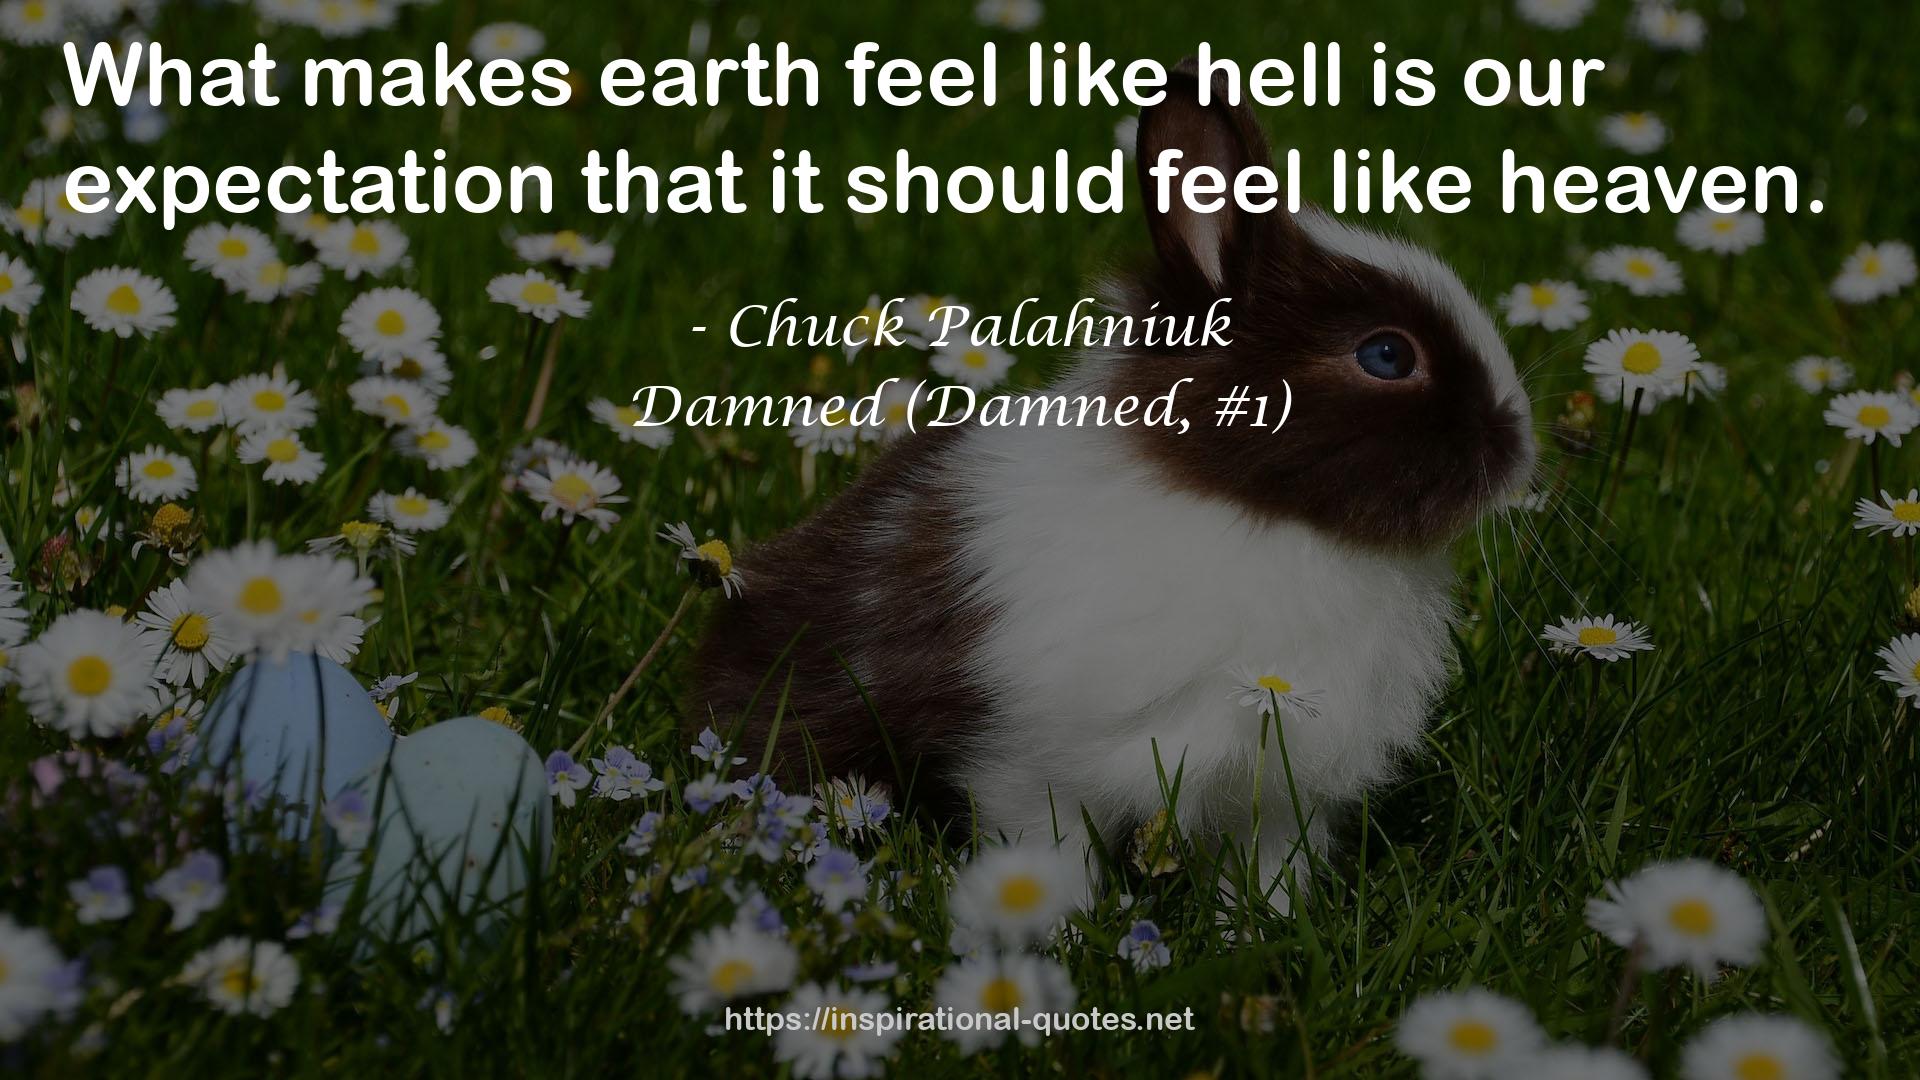 Damned (Damned, #1) QUOTES